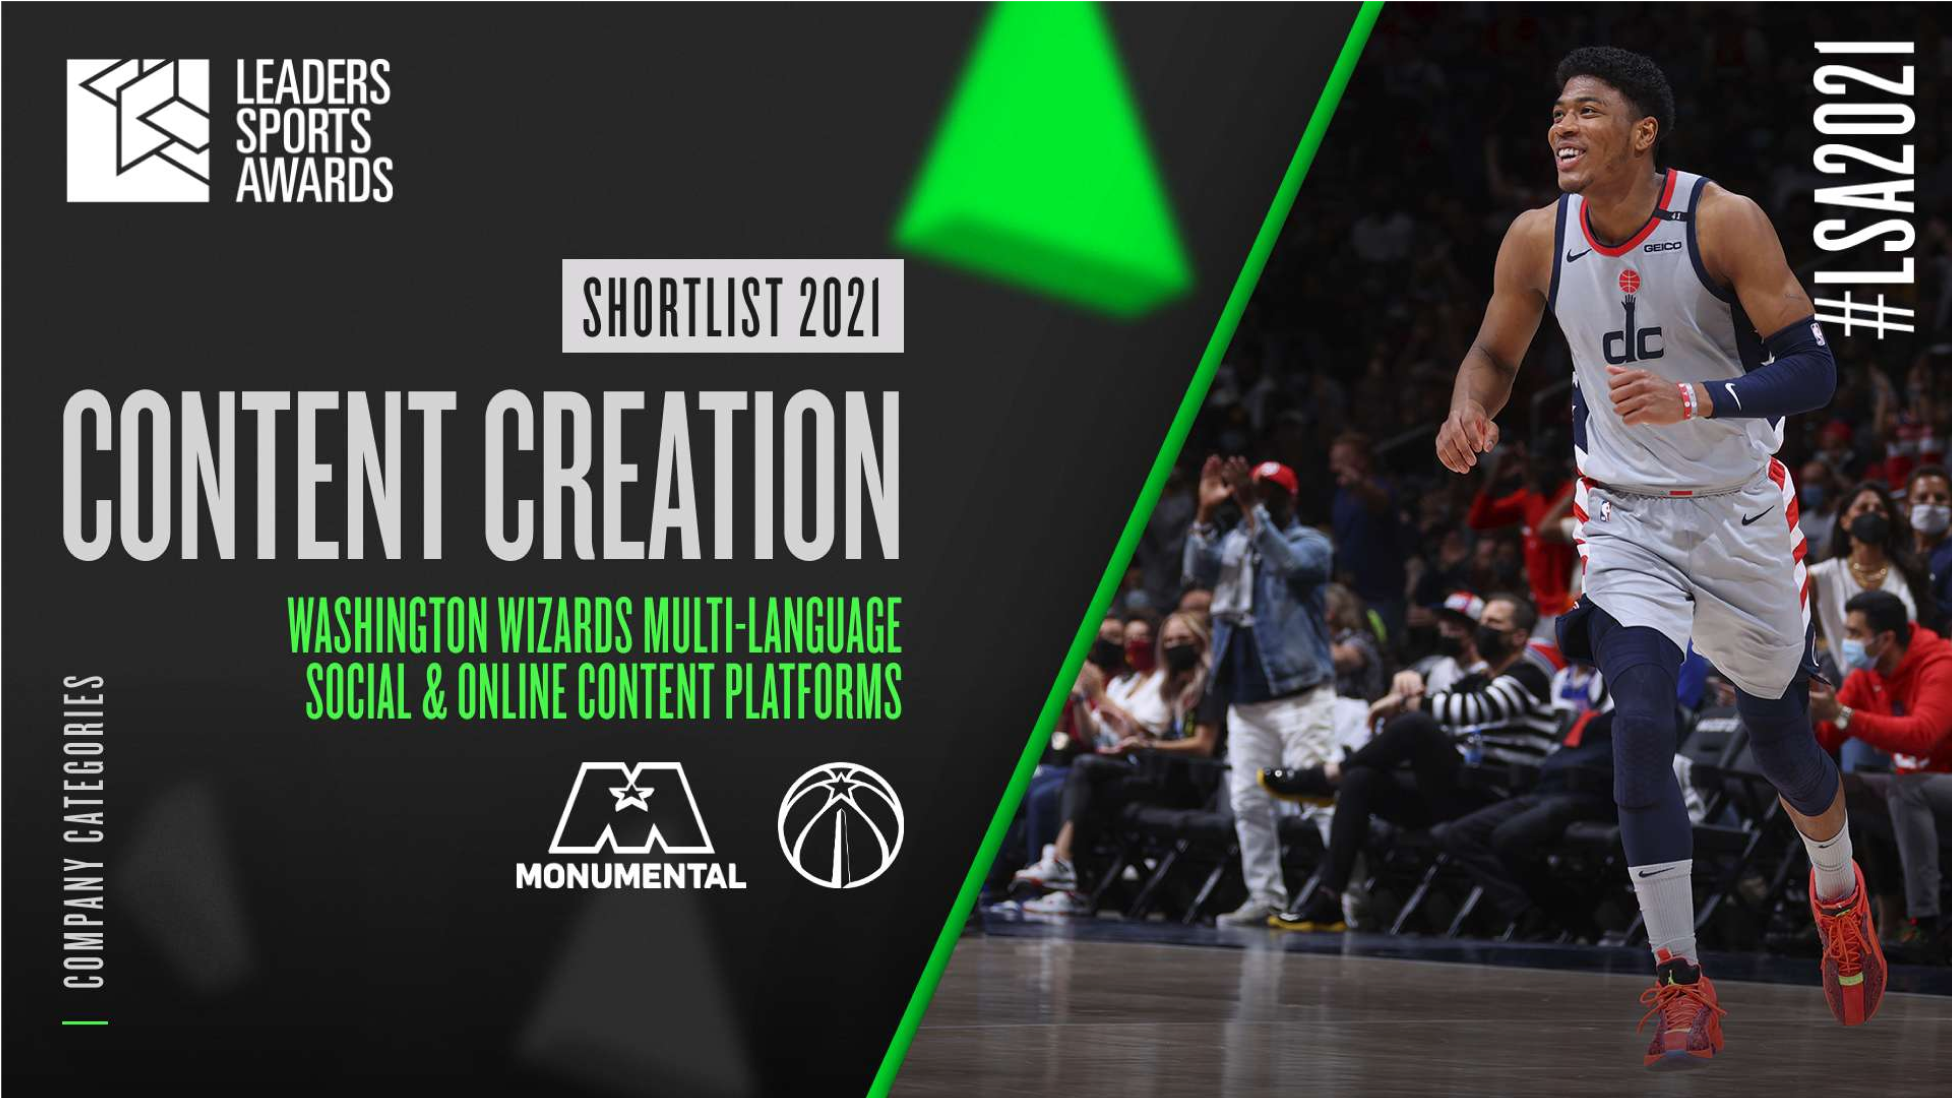 Leaders Sports Awards 2021 Creative for Shortlist Content Creation